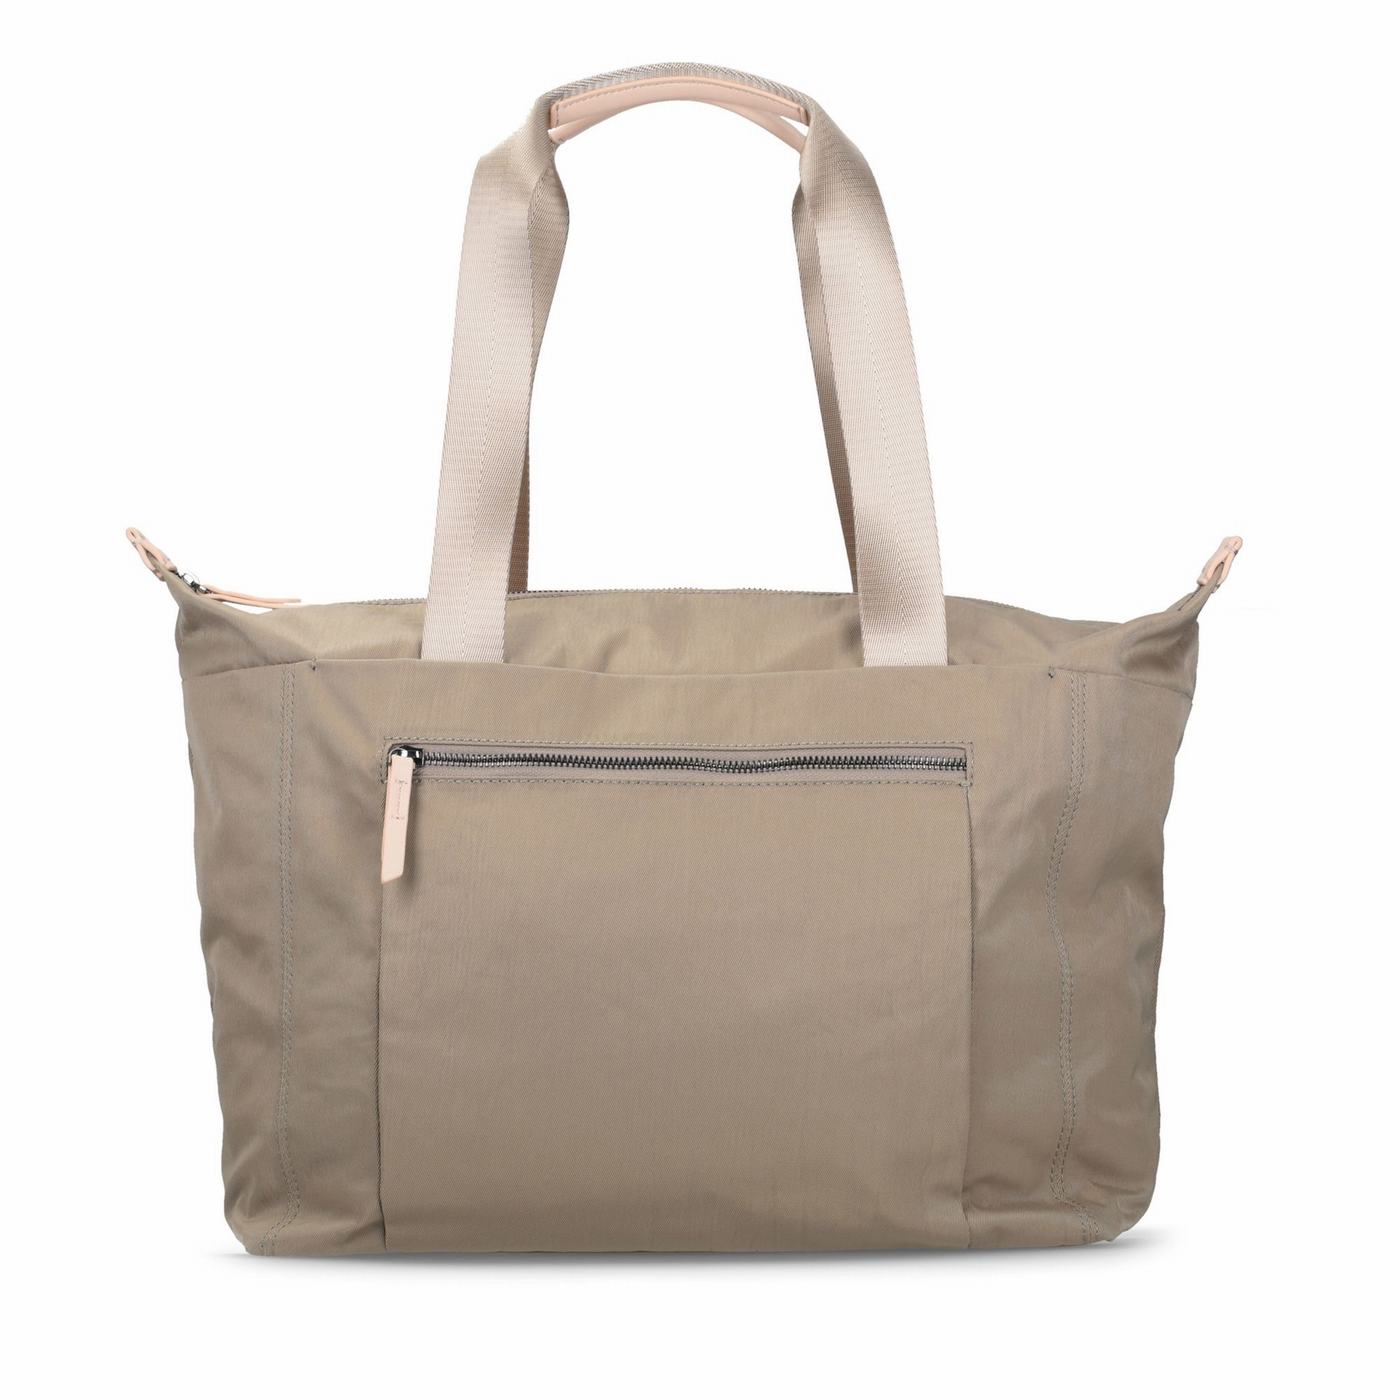 clarks bags online india